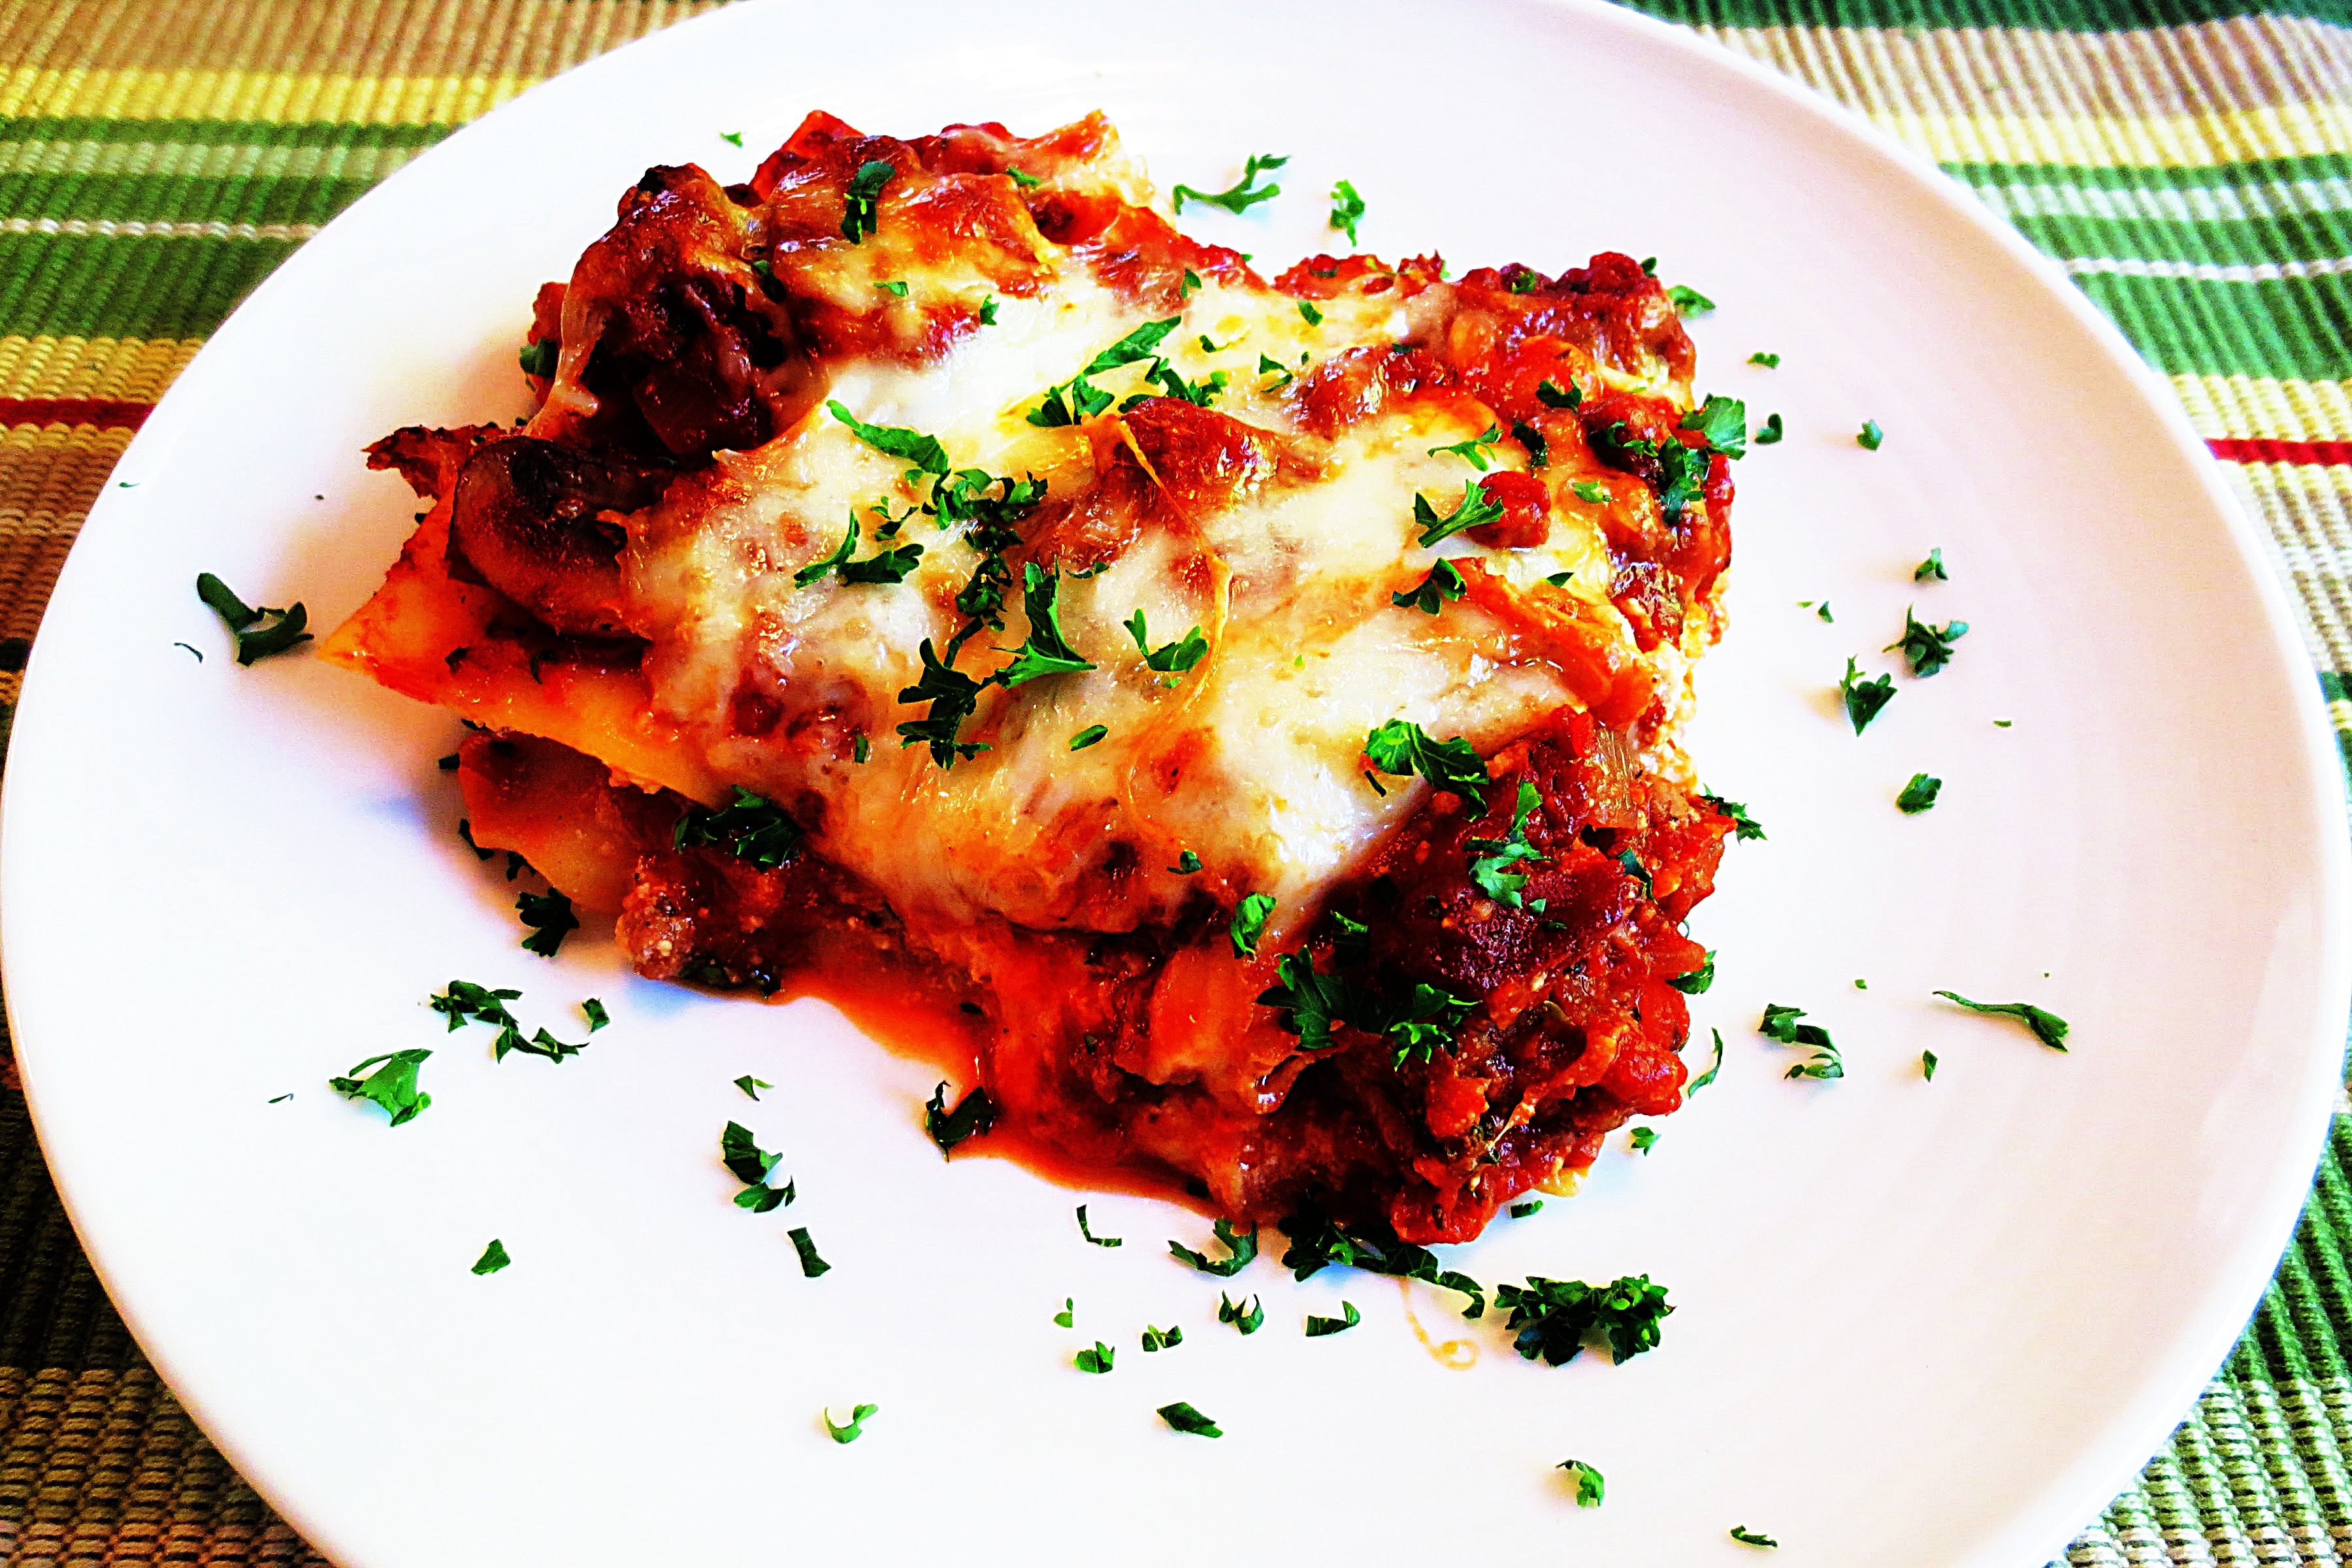 Stupid-Easy Recipe for Lasagna with Spicy Pork Italian Sausage (#1 Top-Rated)